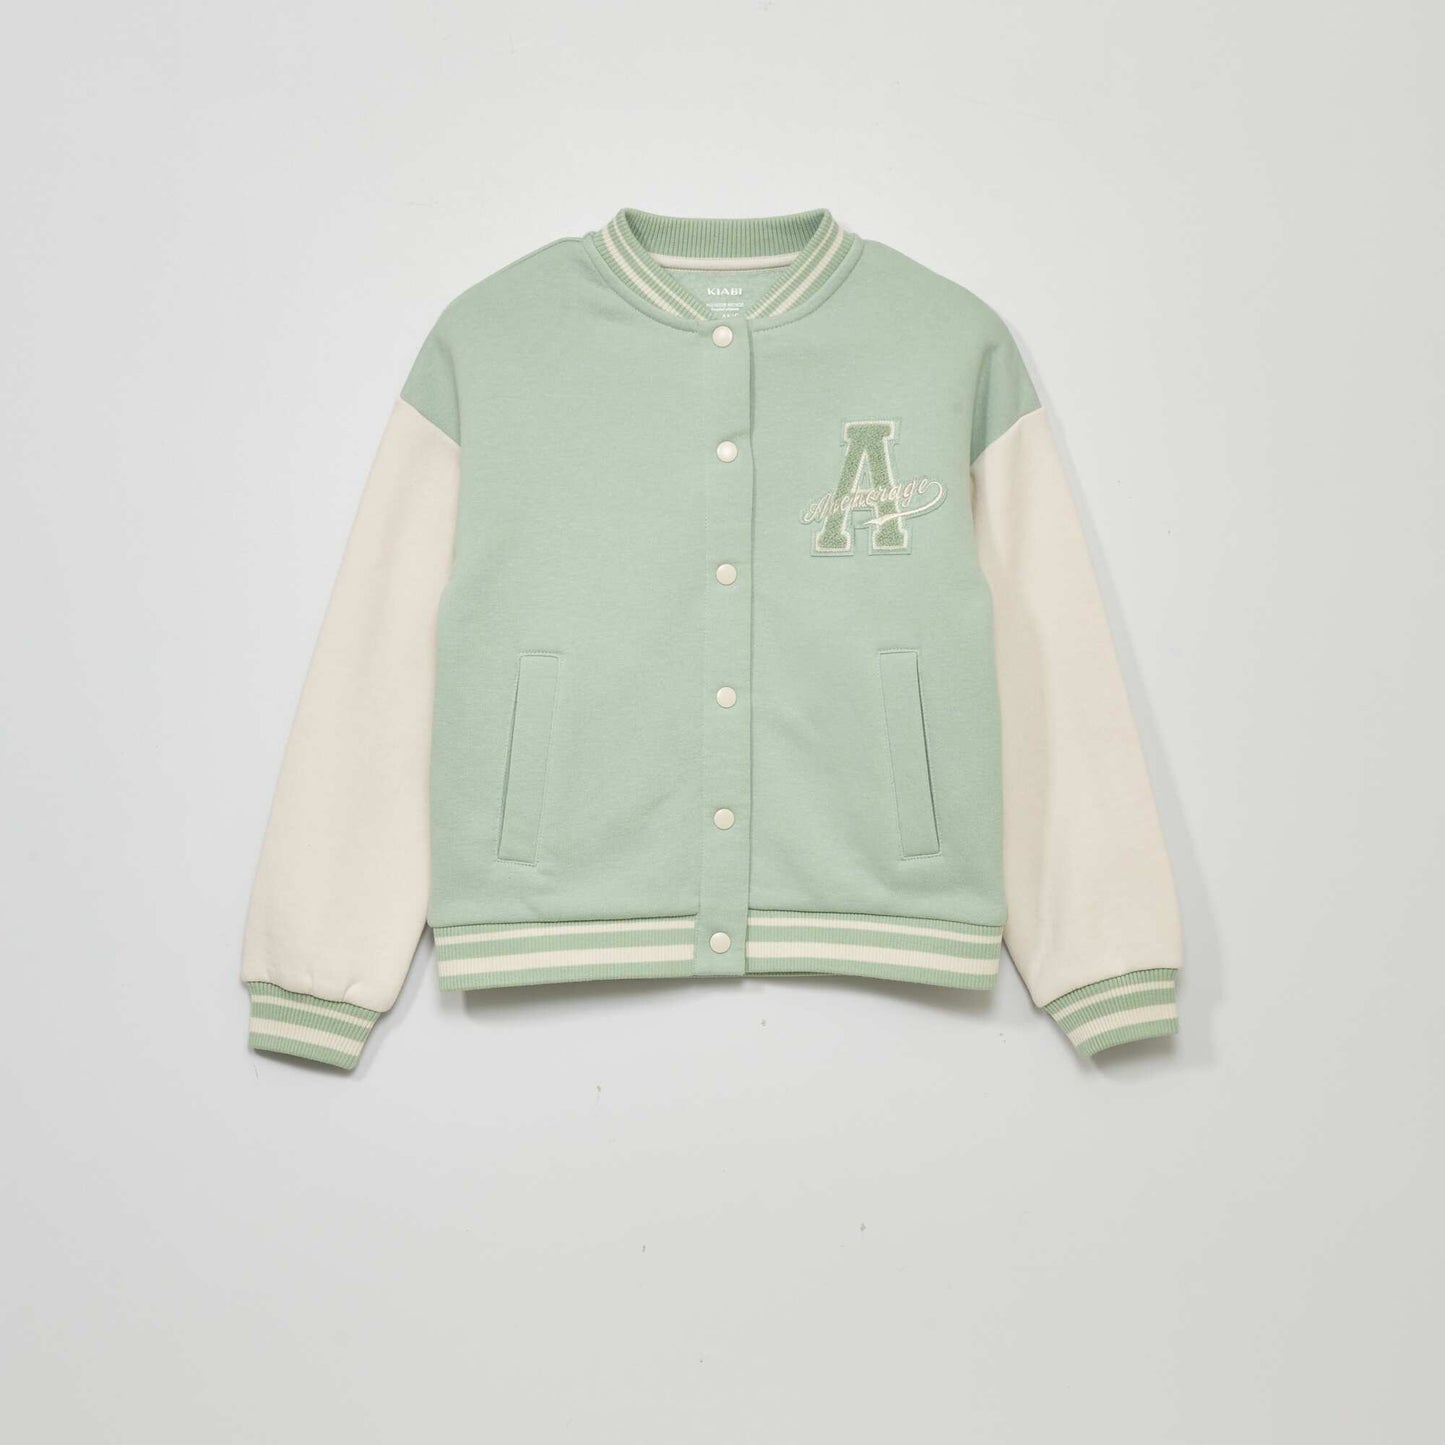 Campus-style jacket Green